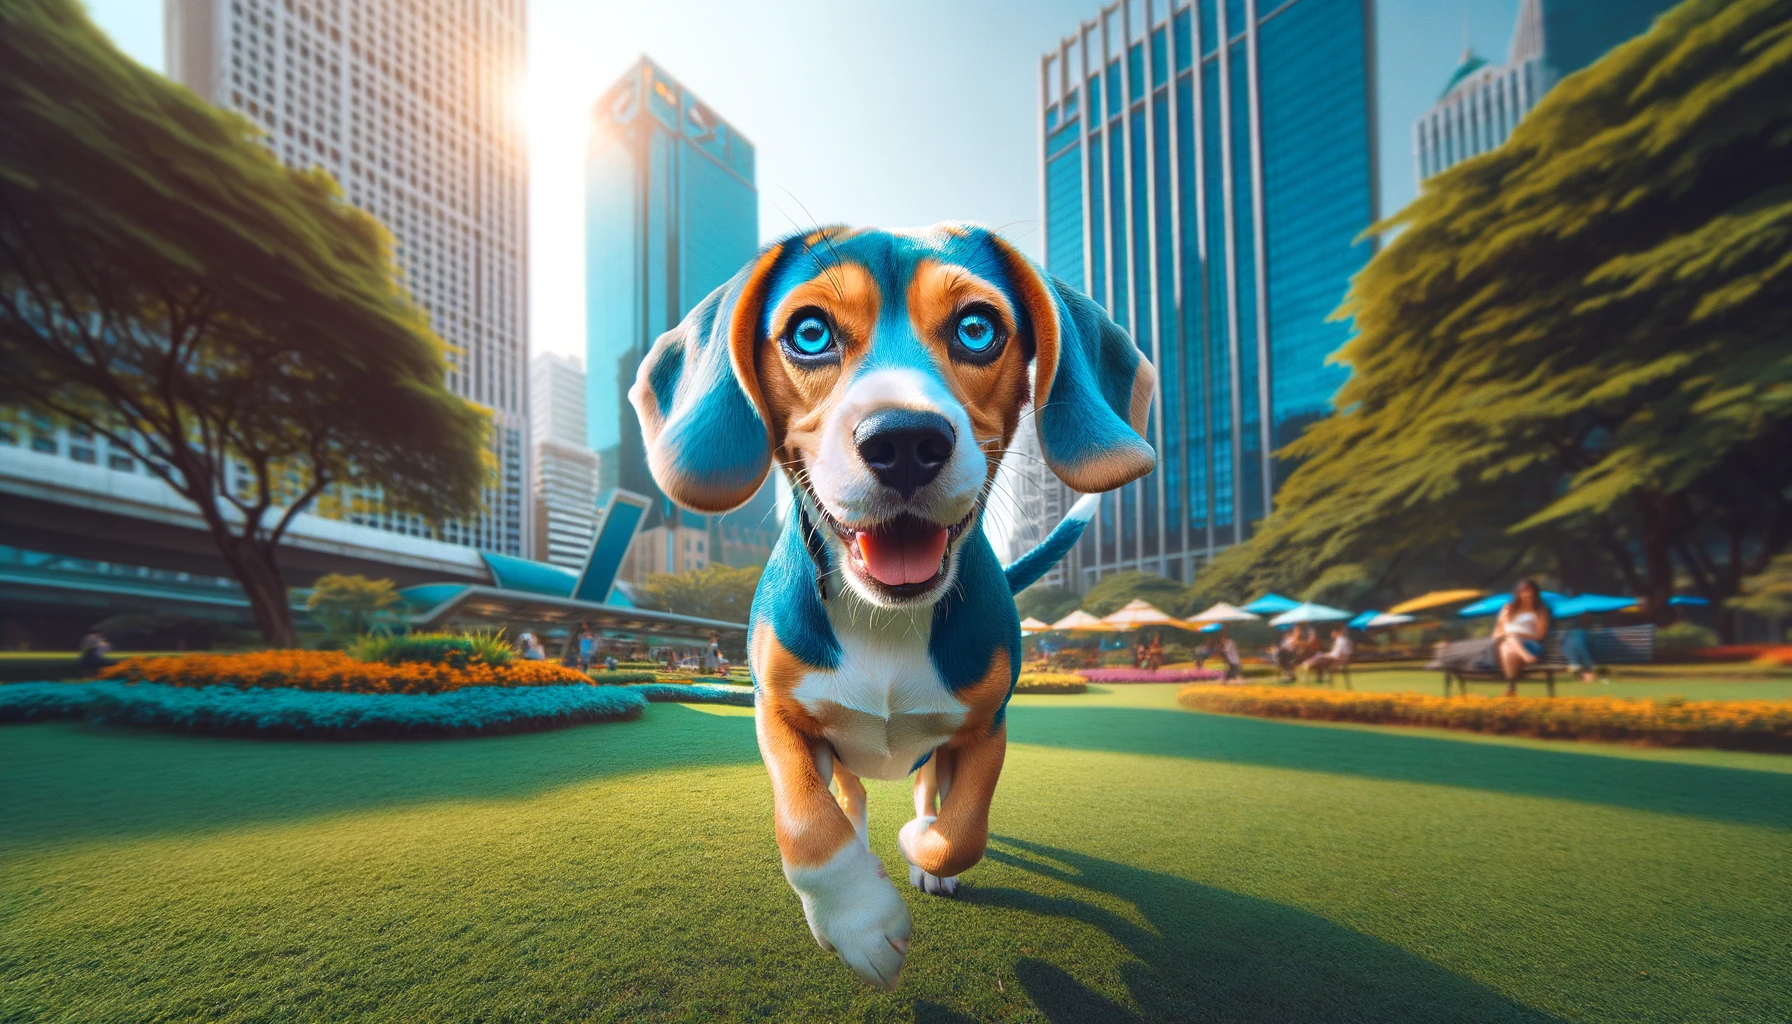 Beagle in a city park